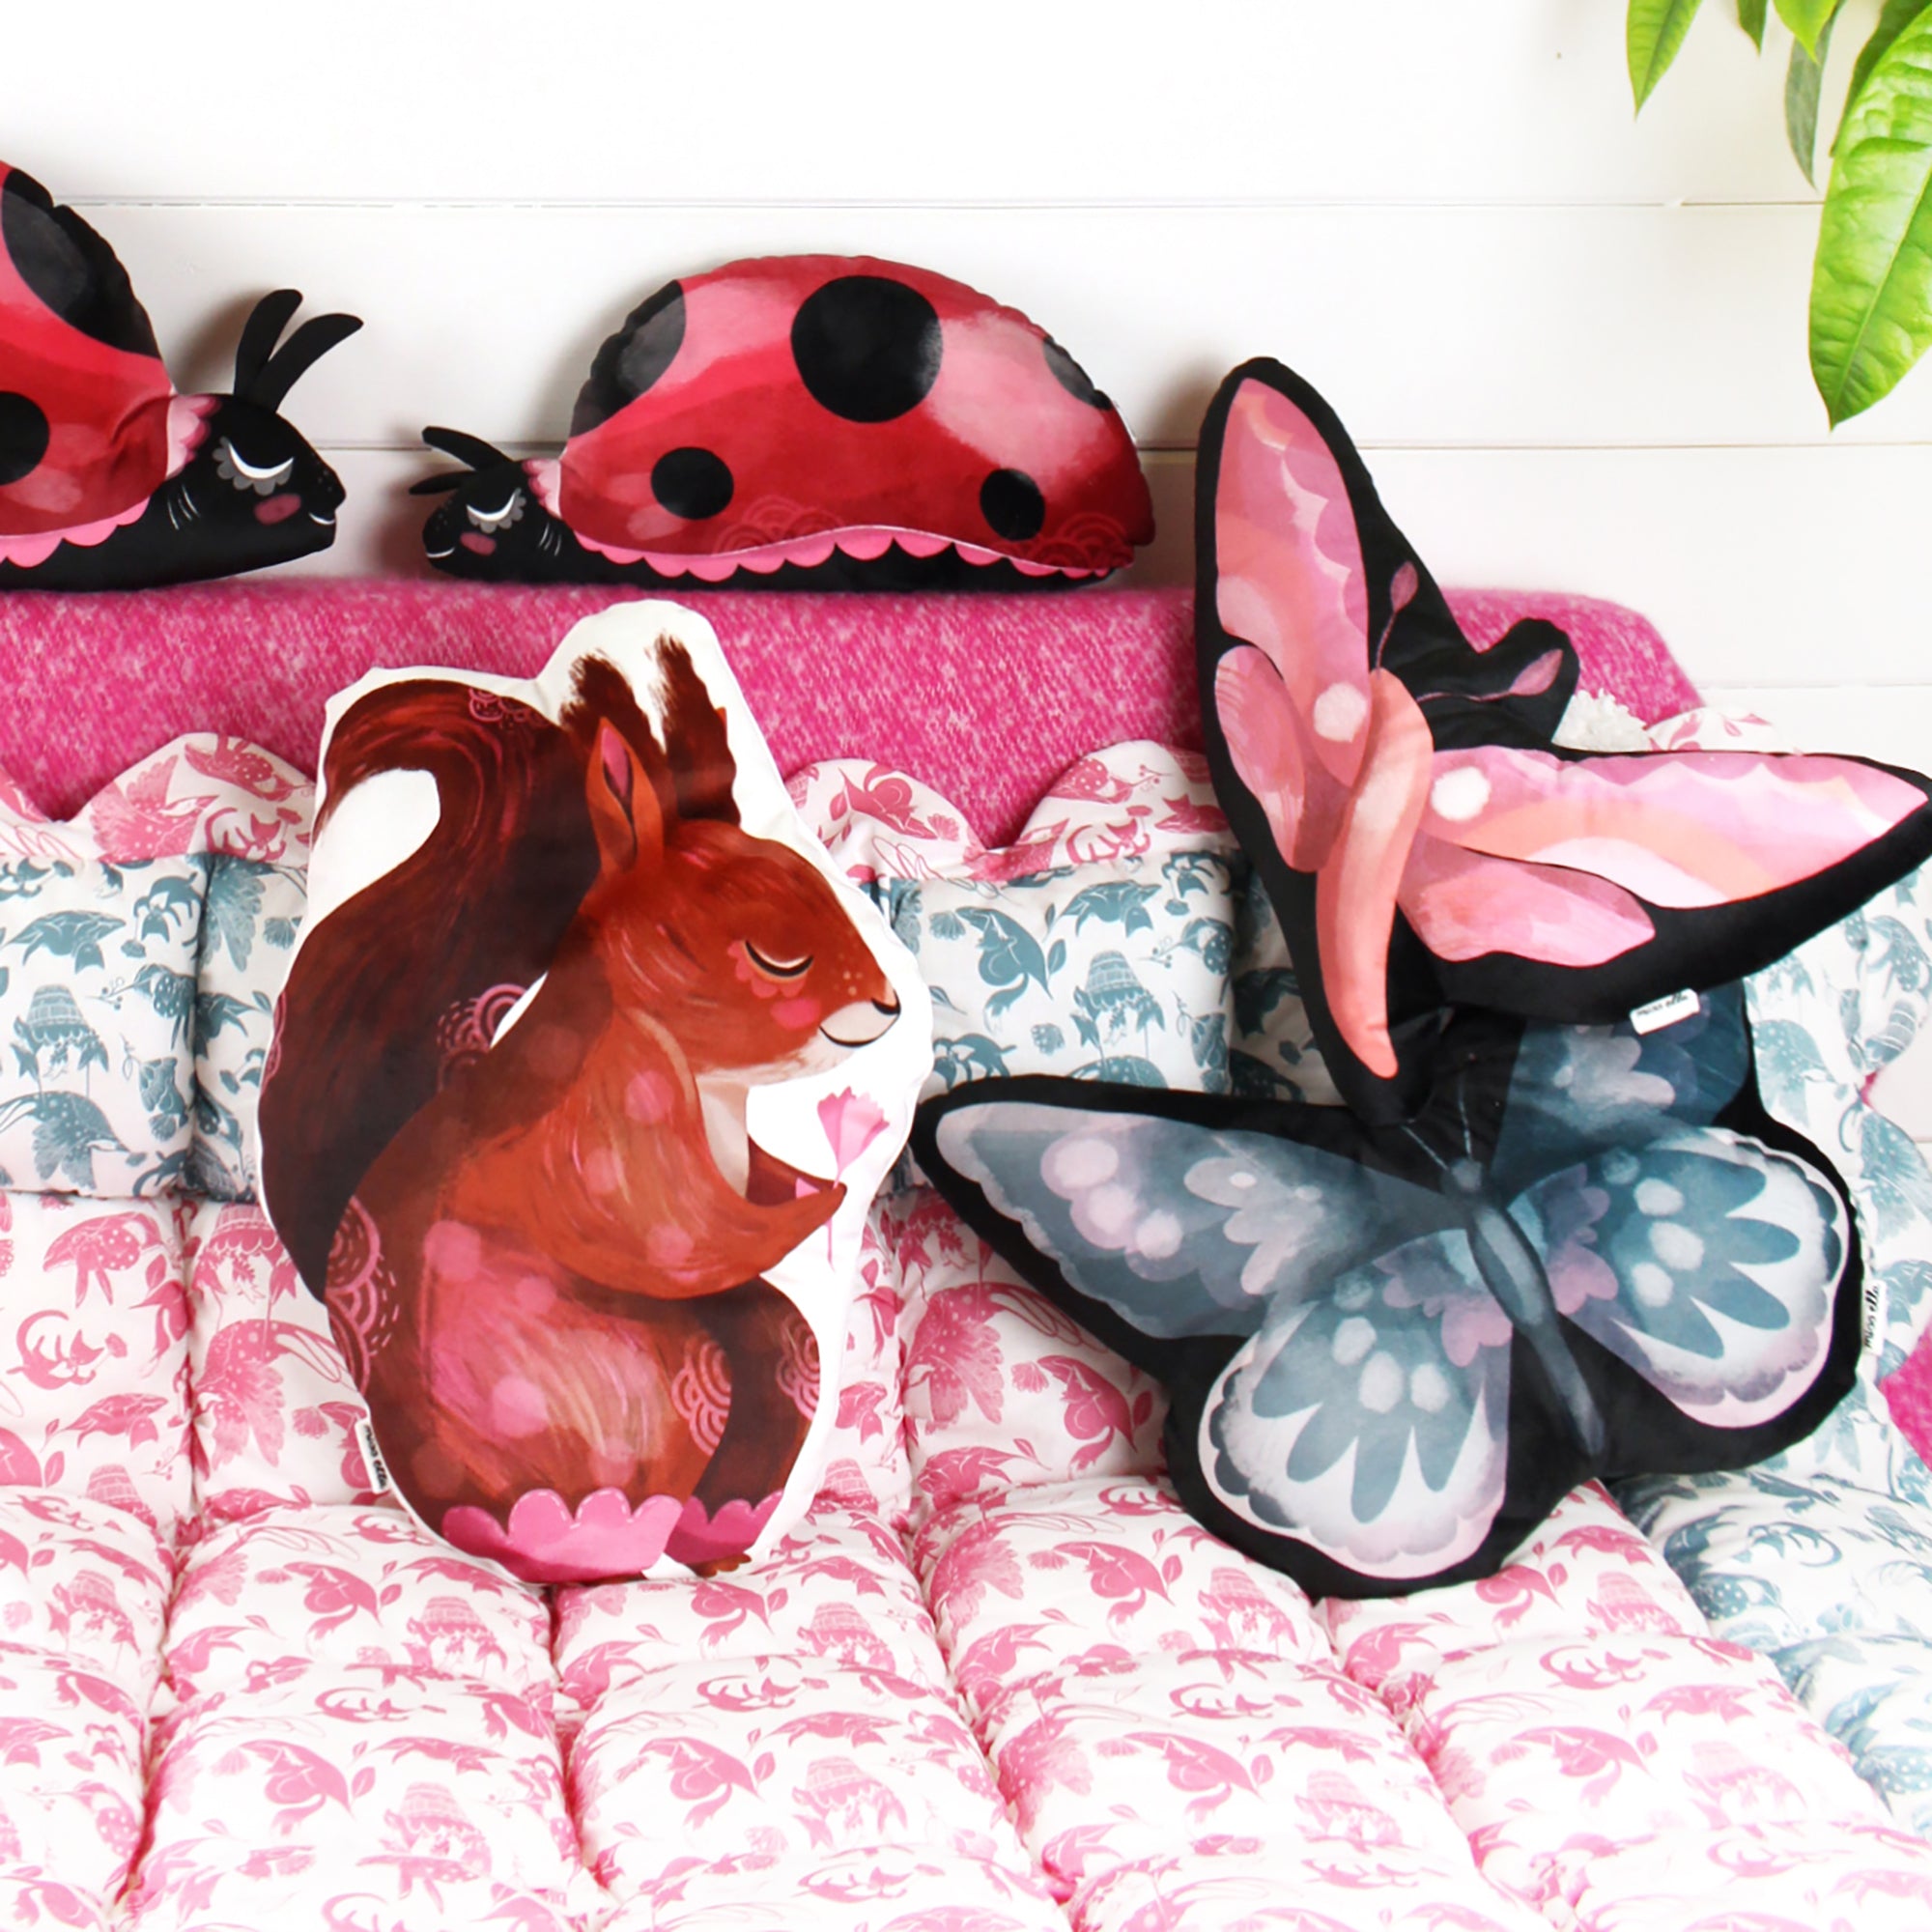 DIY sewing KIT - Butterfly Cushion